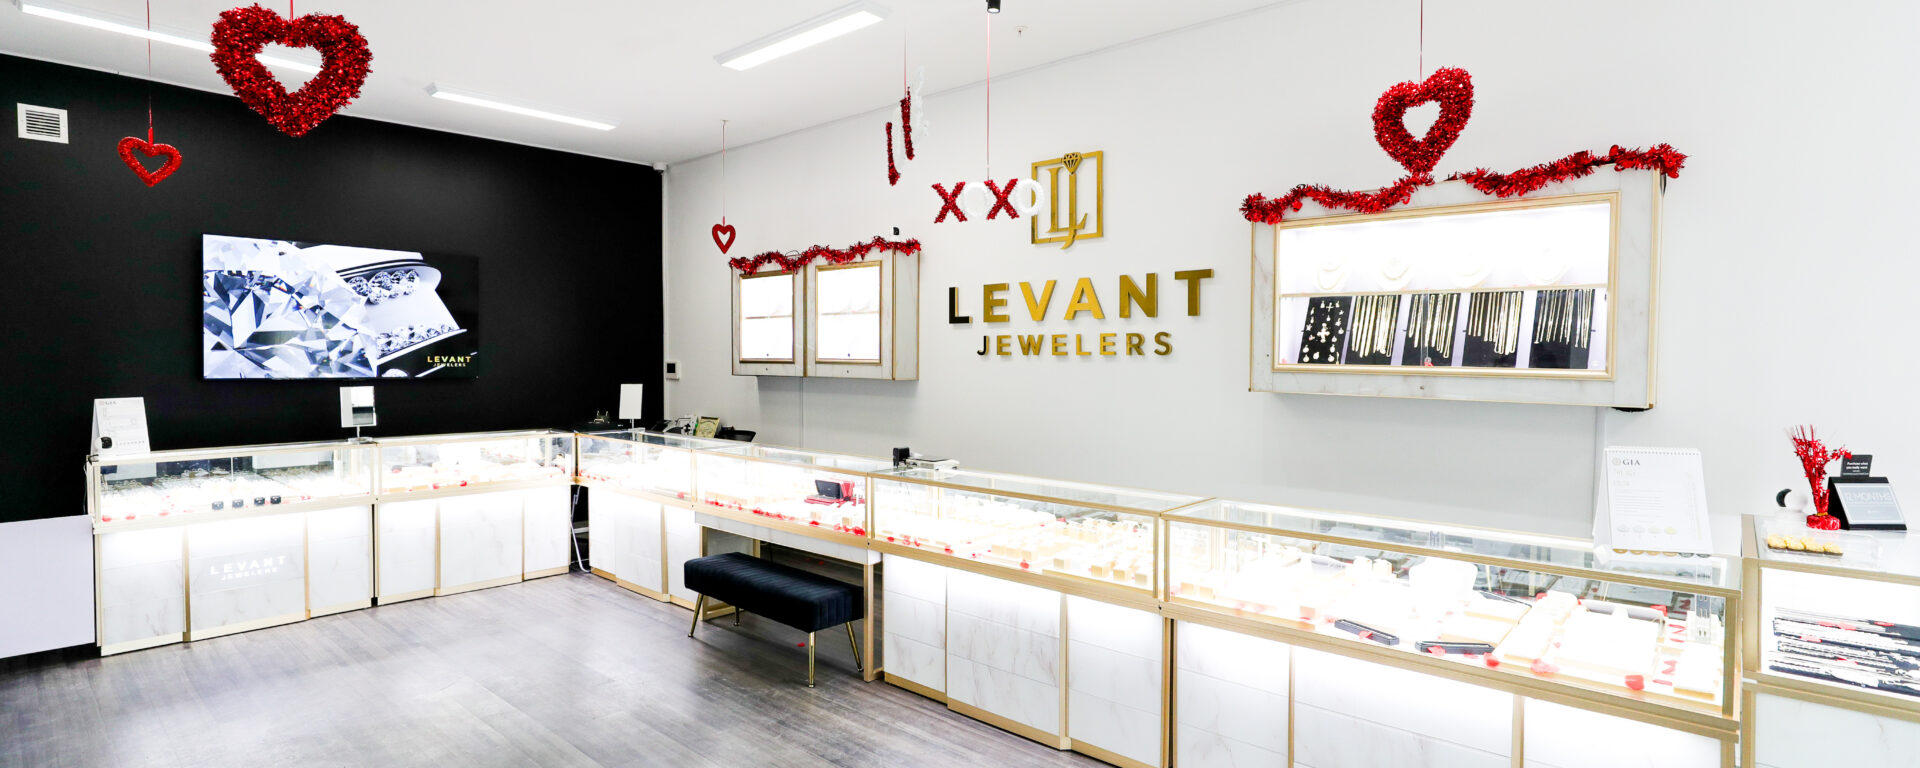 Levant Jewelers Downtown Allentown